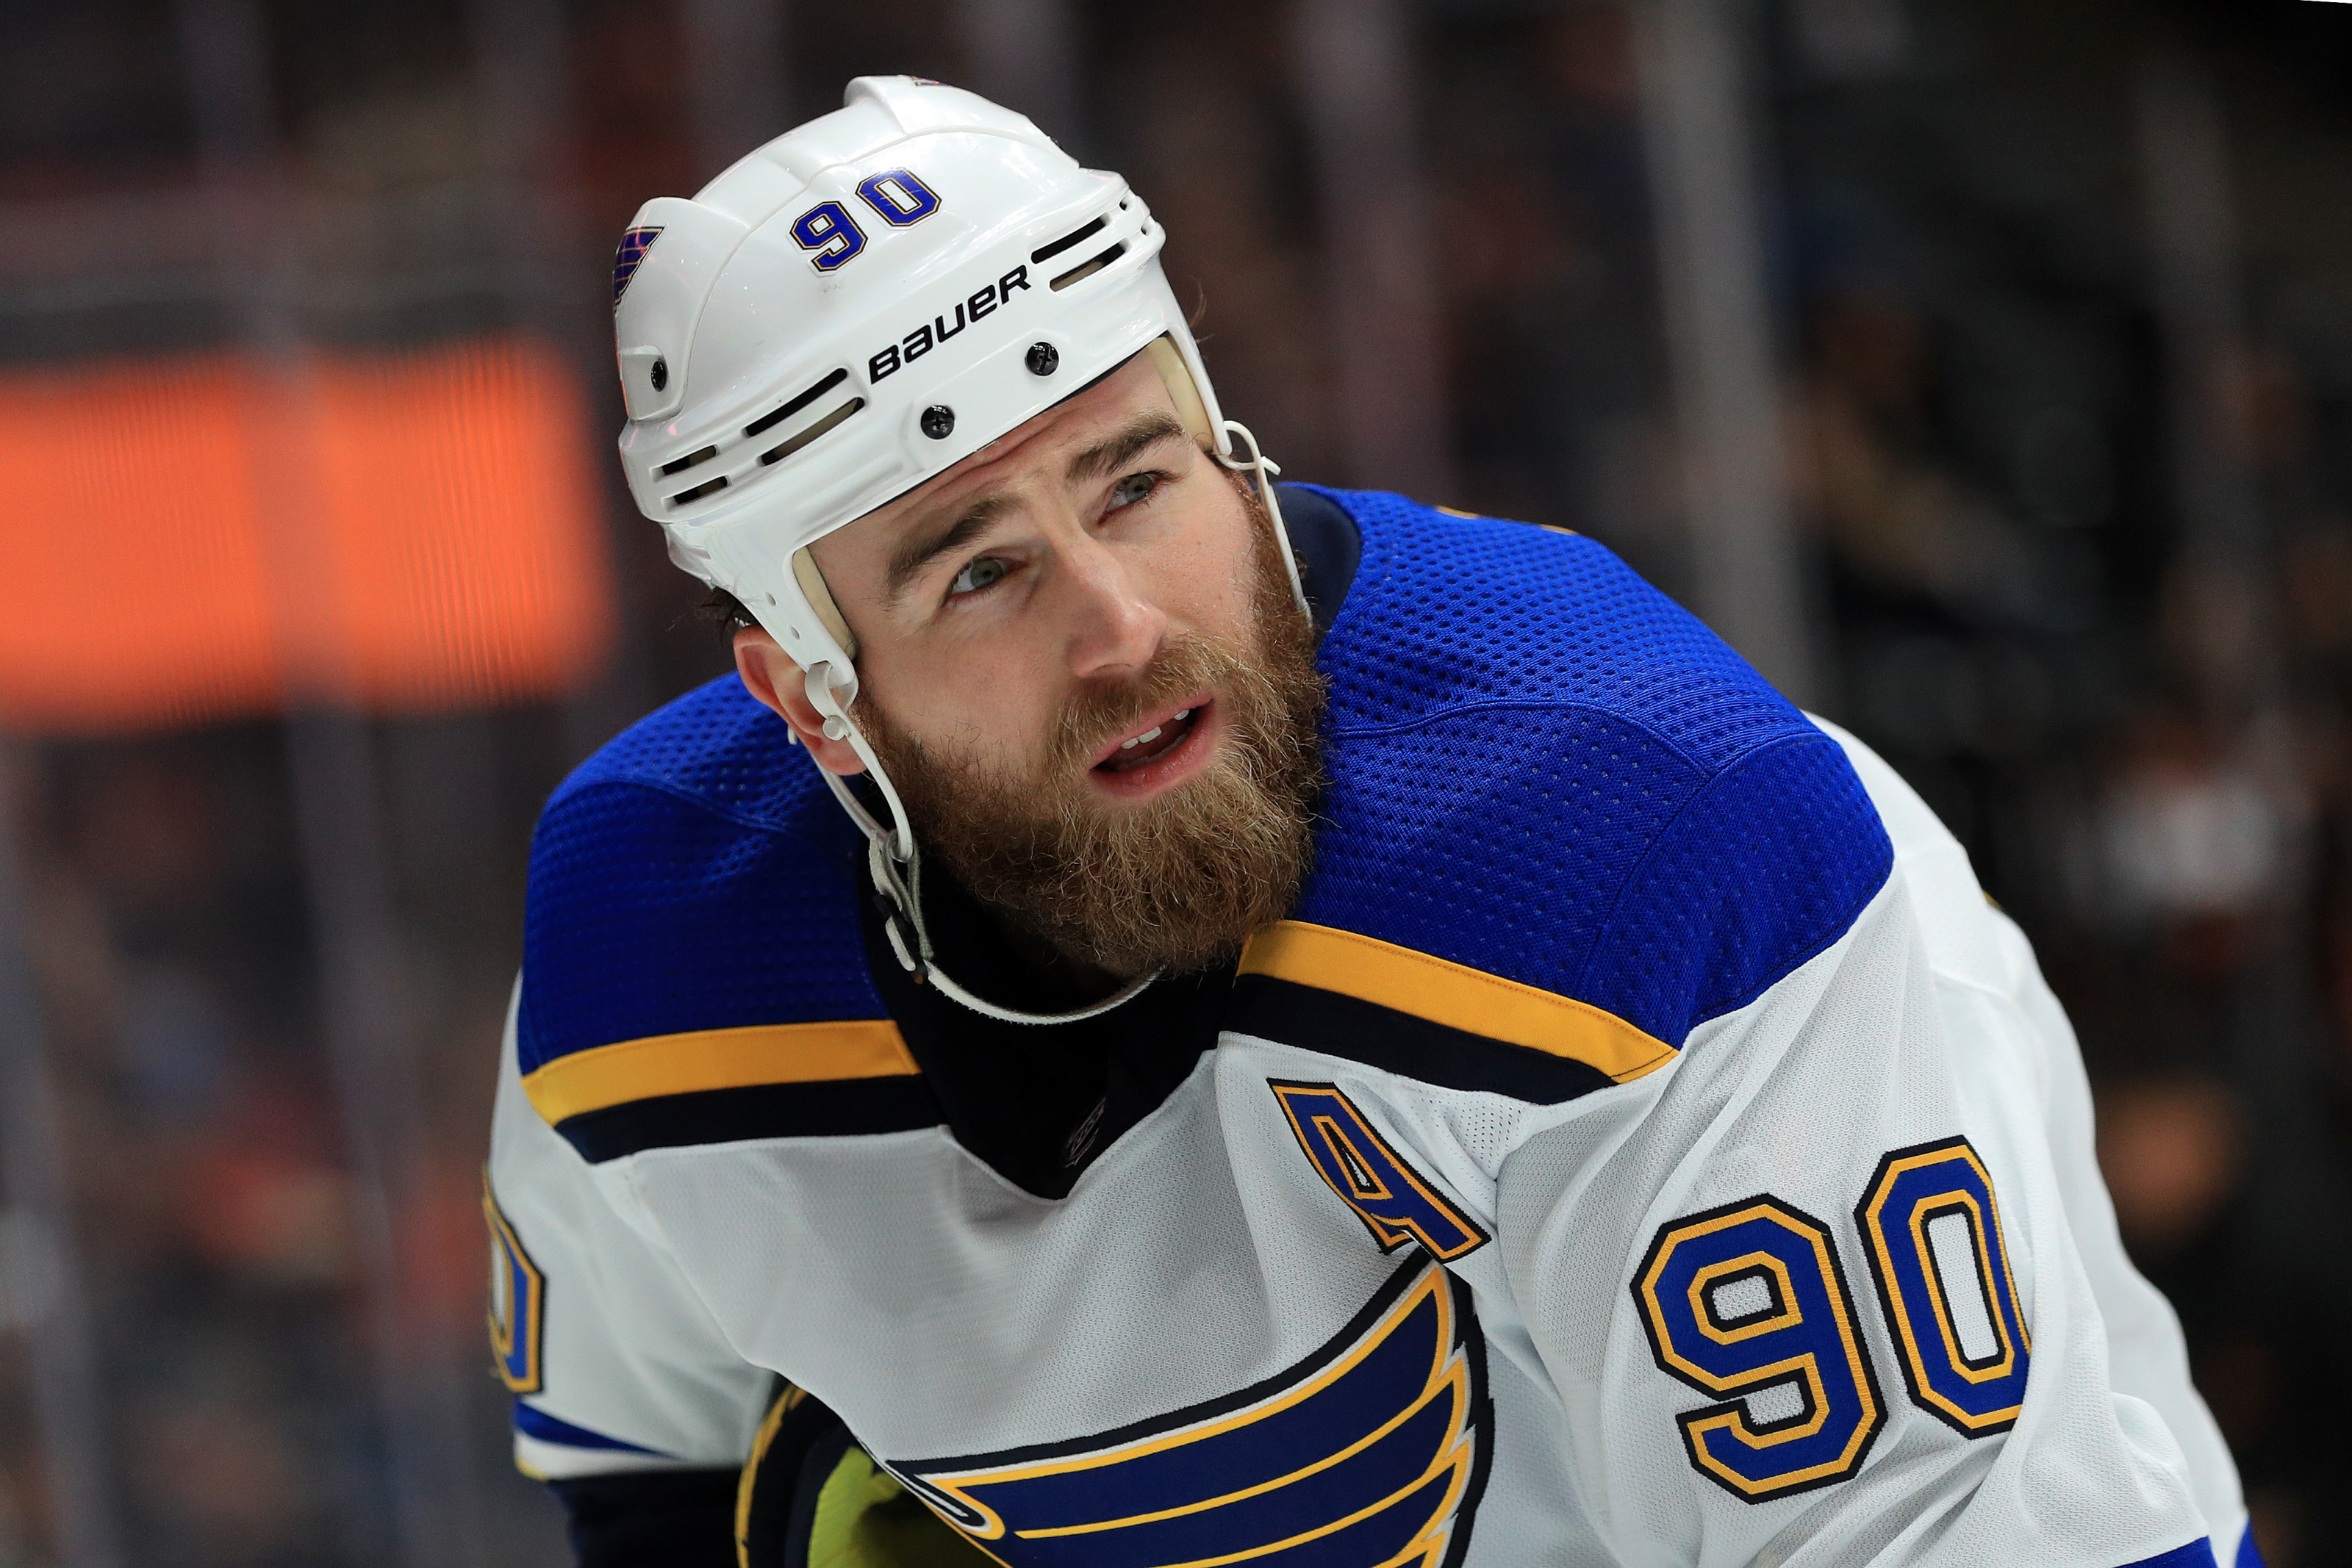 Ryan O'Reilly talks about playing in front of the home fans for